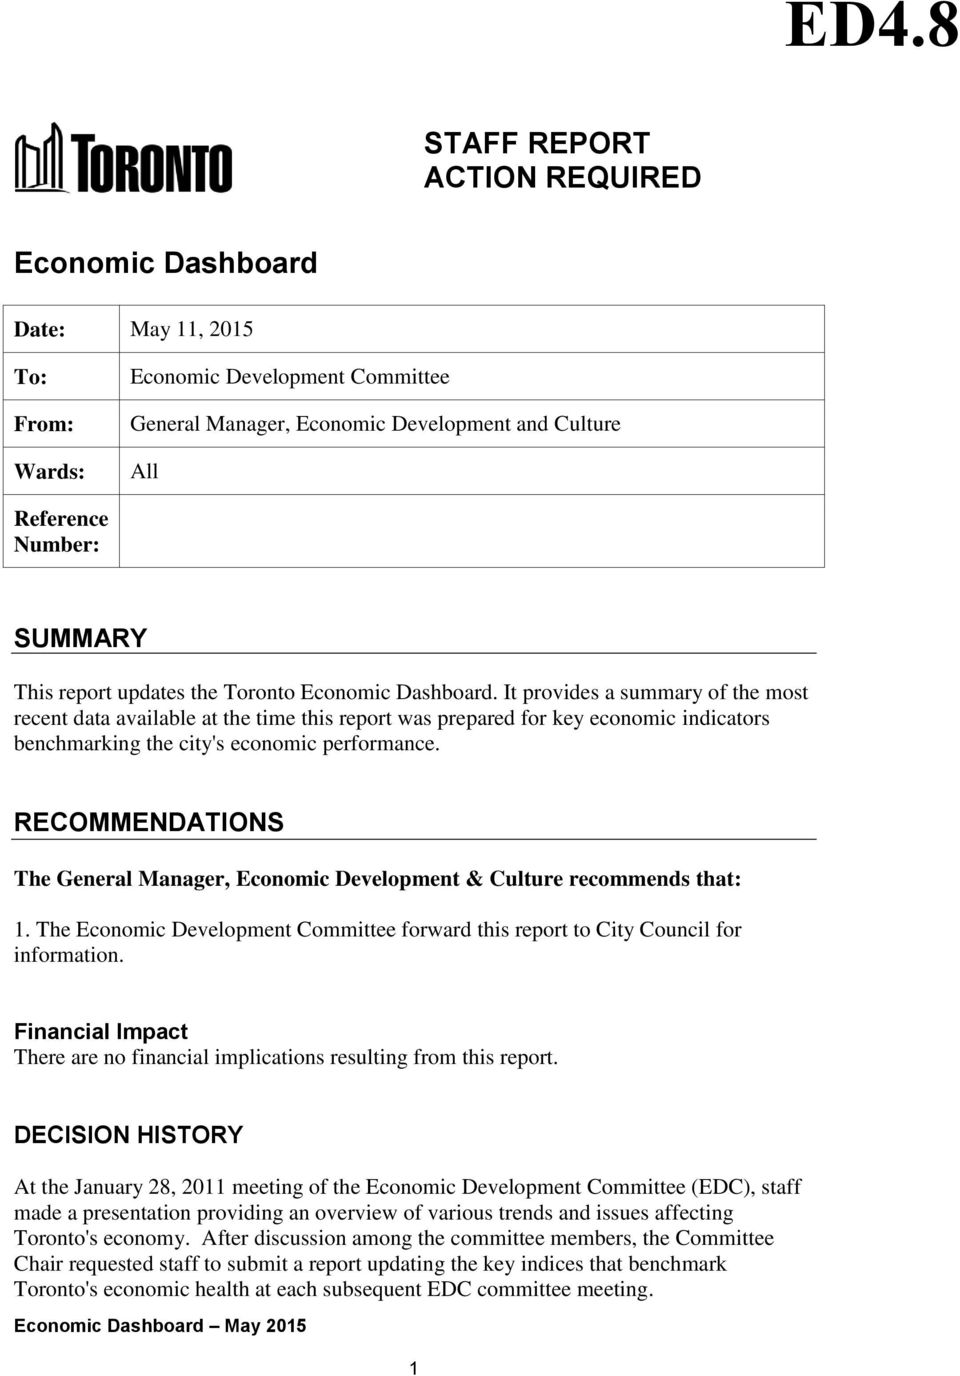 It provides a summary of the most recent data available at the time this report was prepared for key economic indicators benchmarking the city's economic performance.